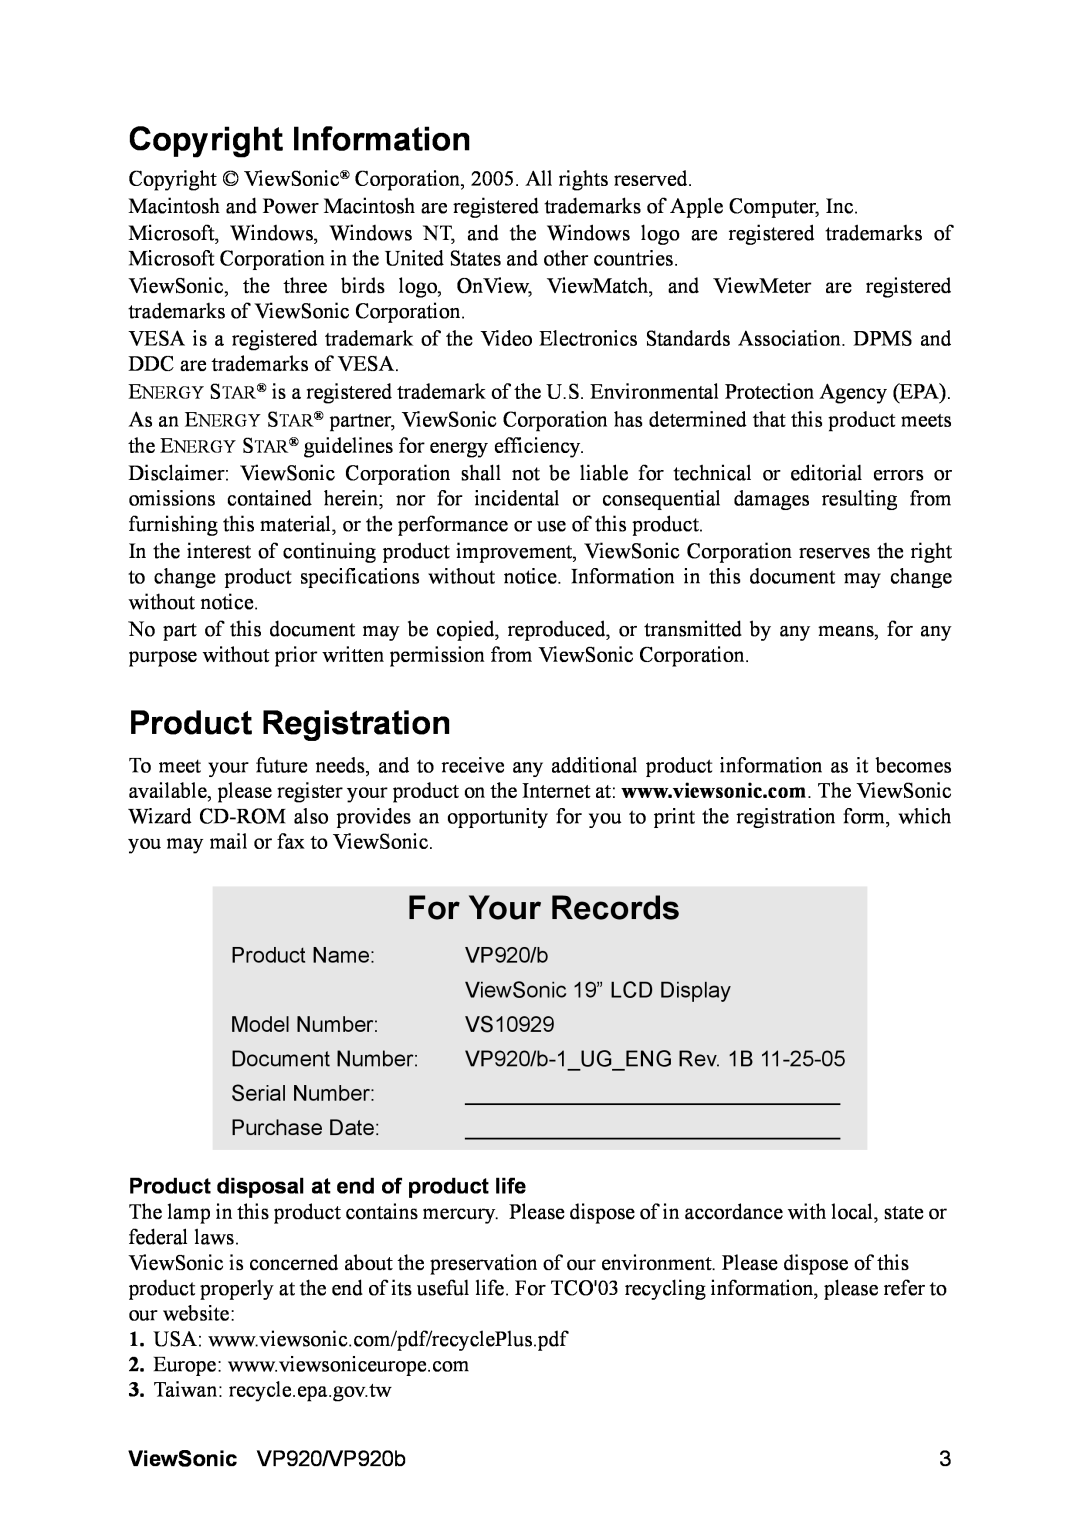 ViewSonic VP920B Copyright Information, Product Registration, For Your Records, Product disposal at end of product life 